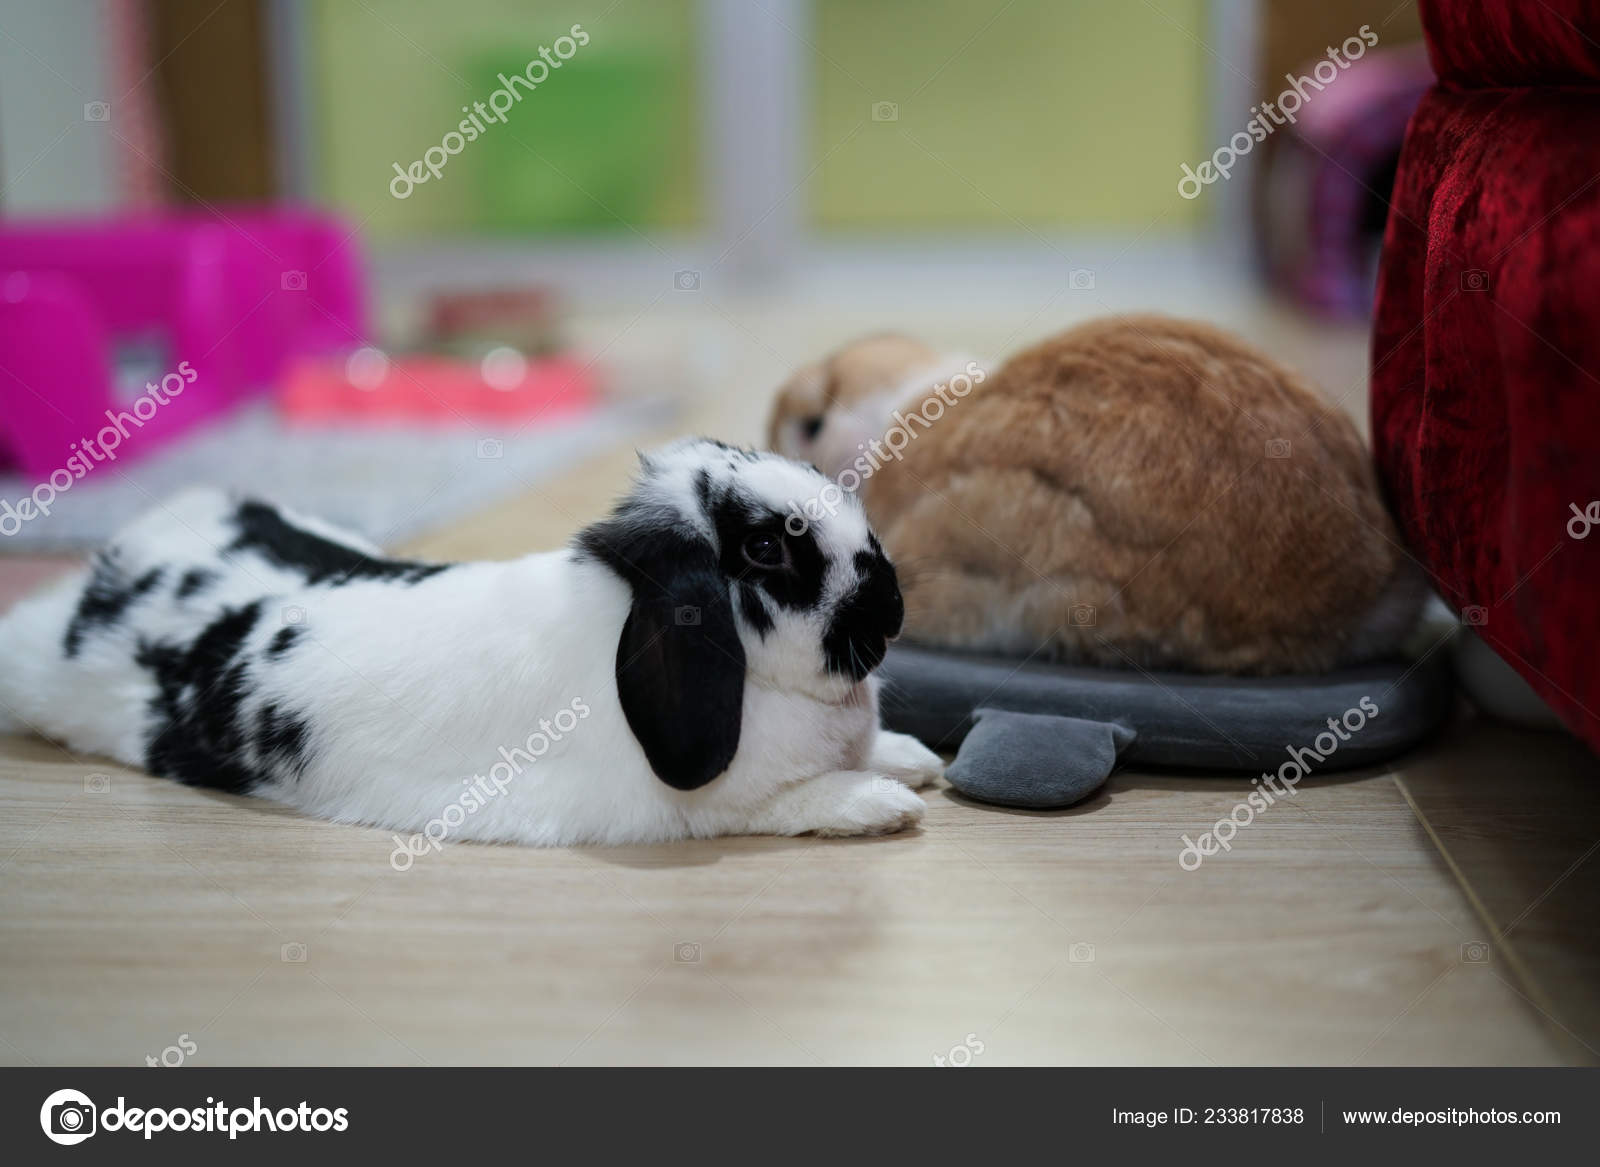 Rabbit Bunny Holland Lop Black White Brown Color Relax Floor Stock Photo C Alicebuddy 233817838